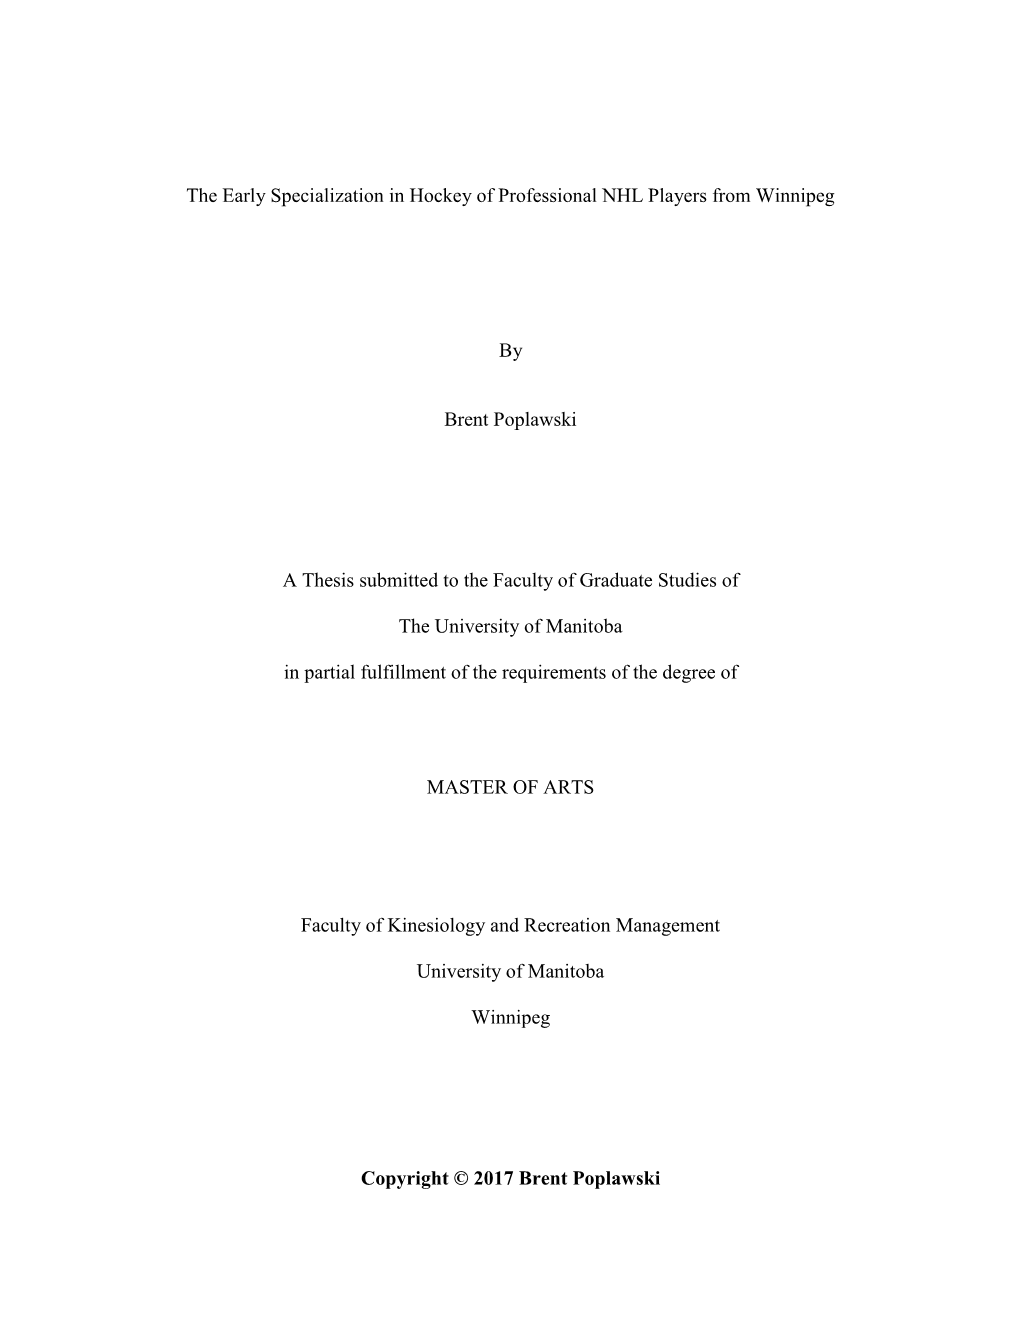 The Early Specialization in Hockey of Professional NHL Players from Winnipeg by Brent Poplawski a Thesis Submitted to the Facul